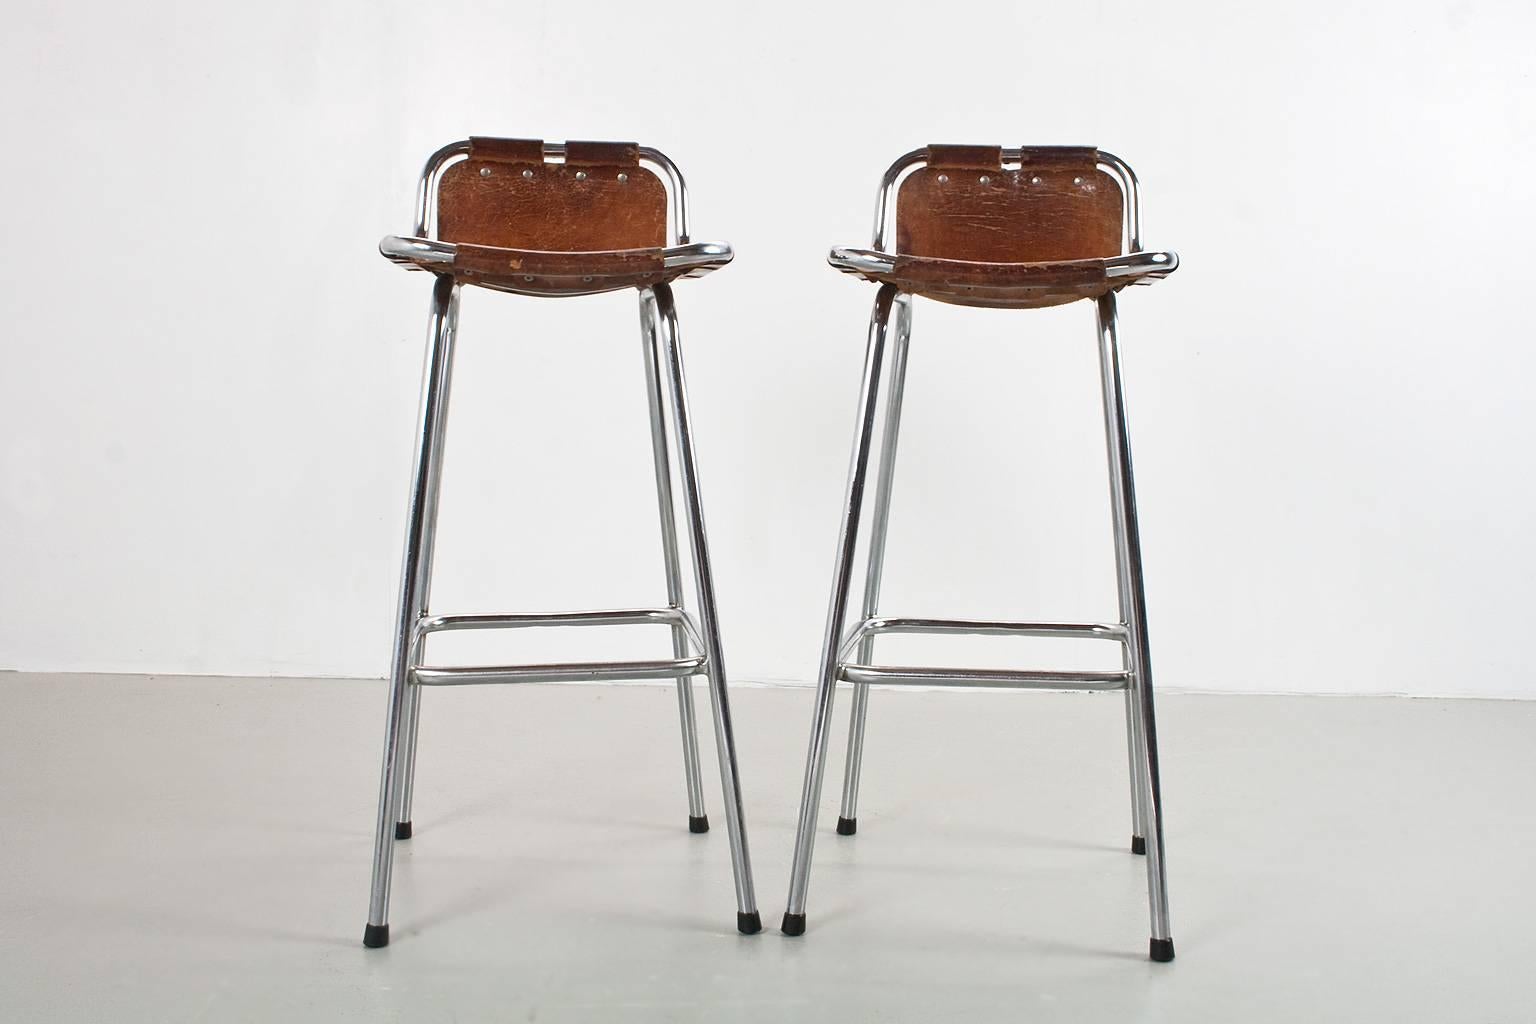 An original pair of midcentury modern French lightweight high bar stools with brown camel colored saddle leather sling seats, on a chromed tubular frame selected by Charlotte Perriand for the “Les Arcs” ski resort in France, 1960s. The chromed frame